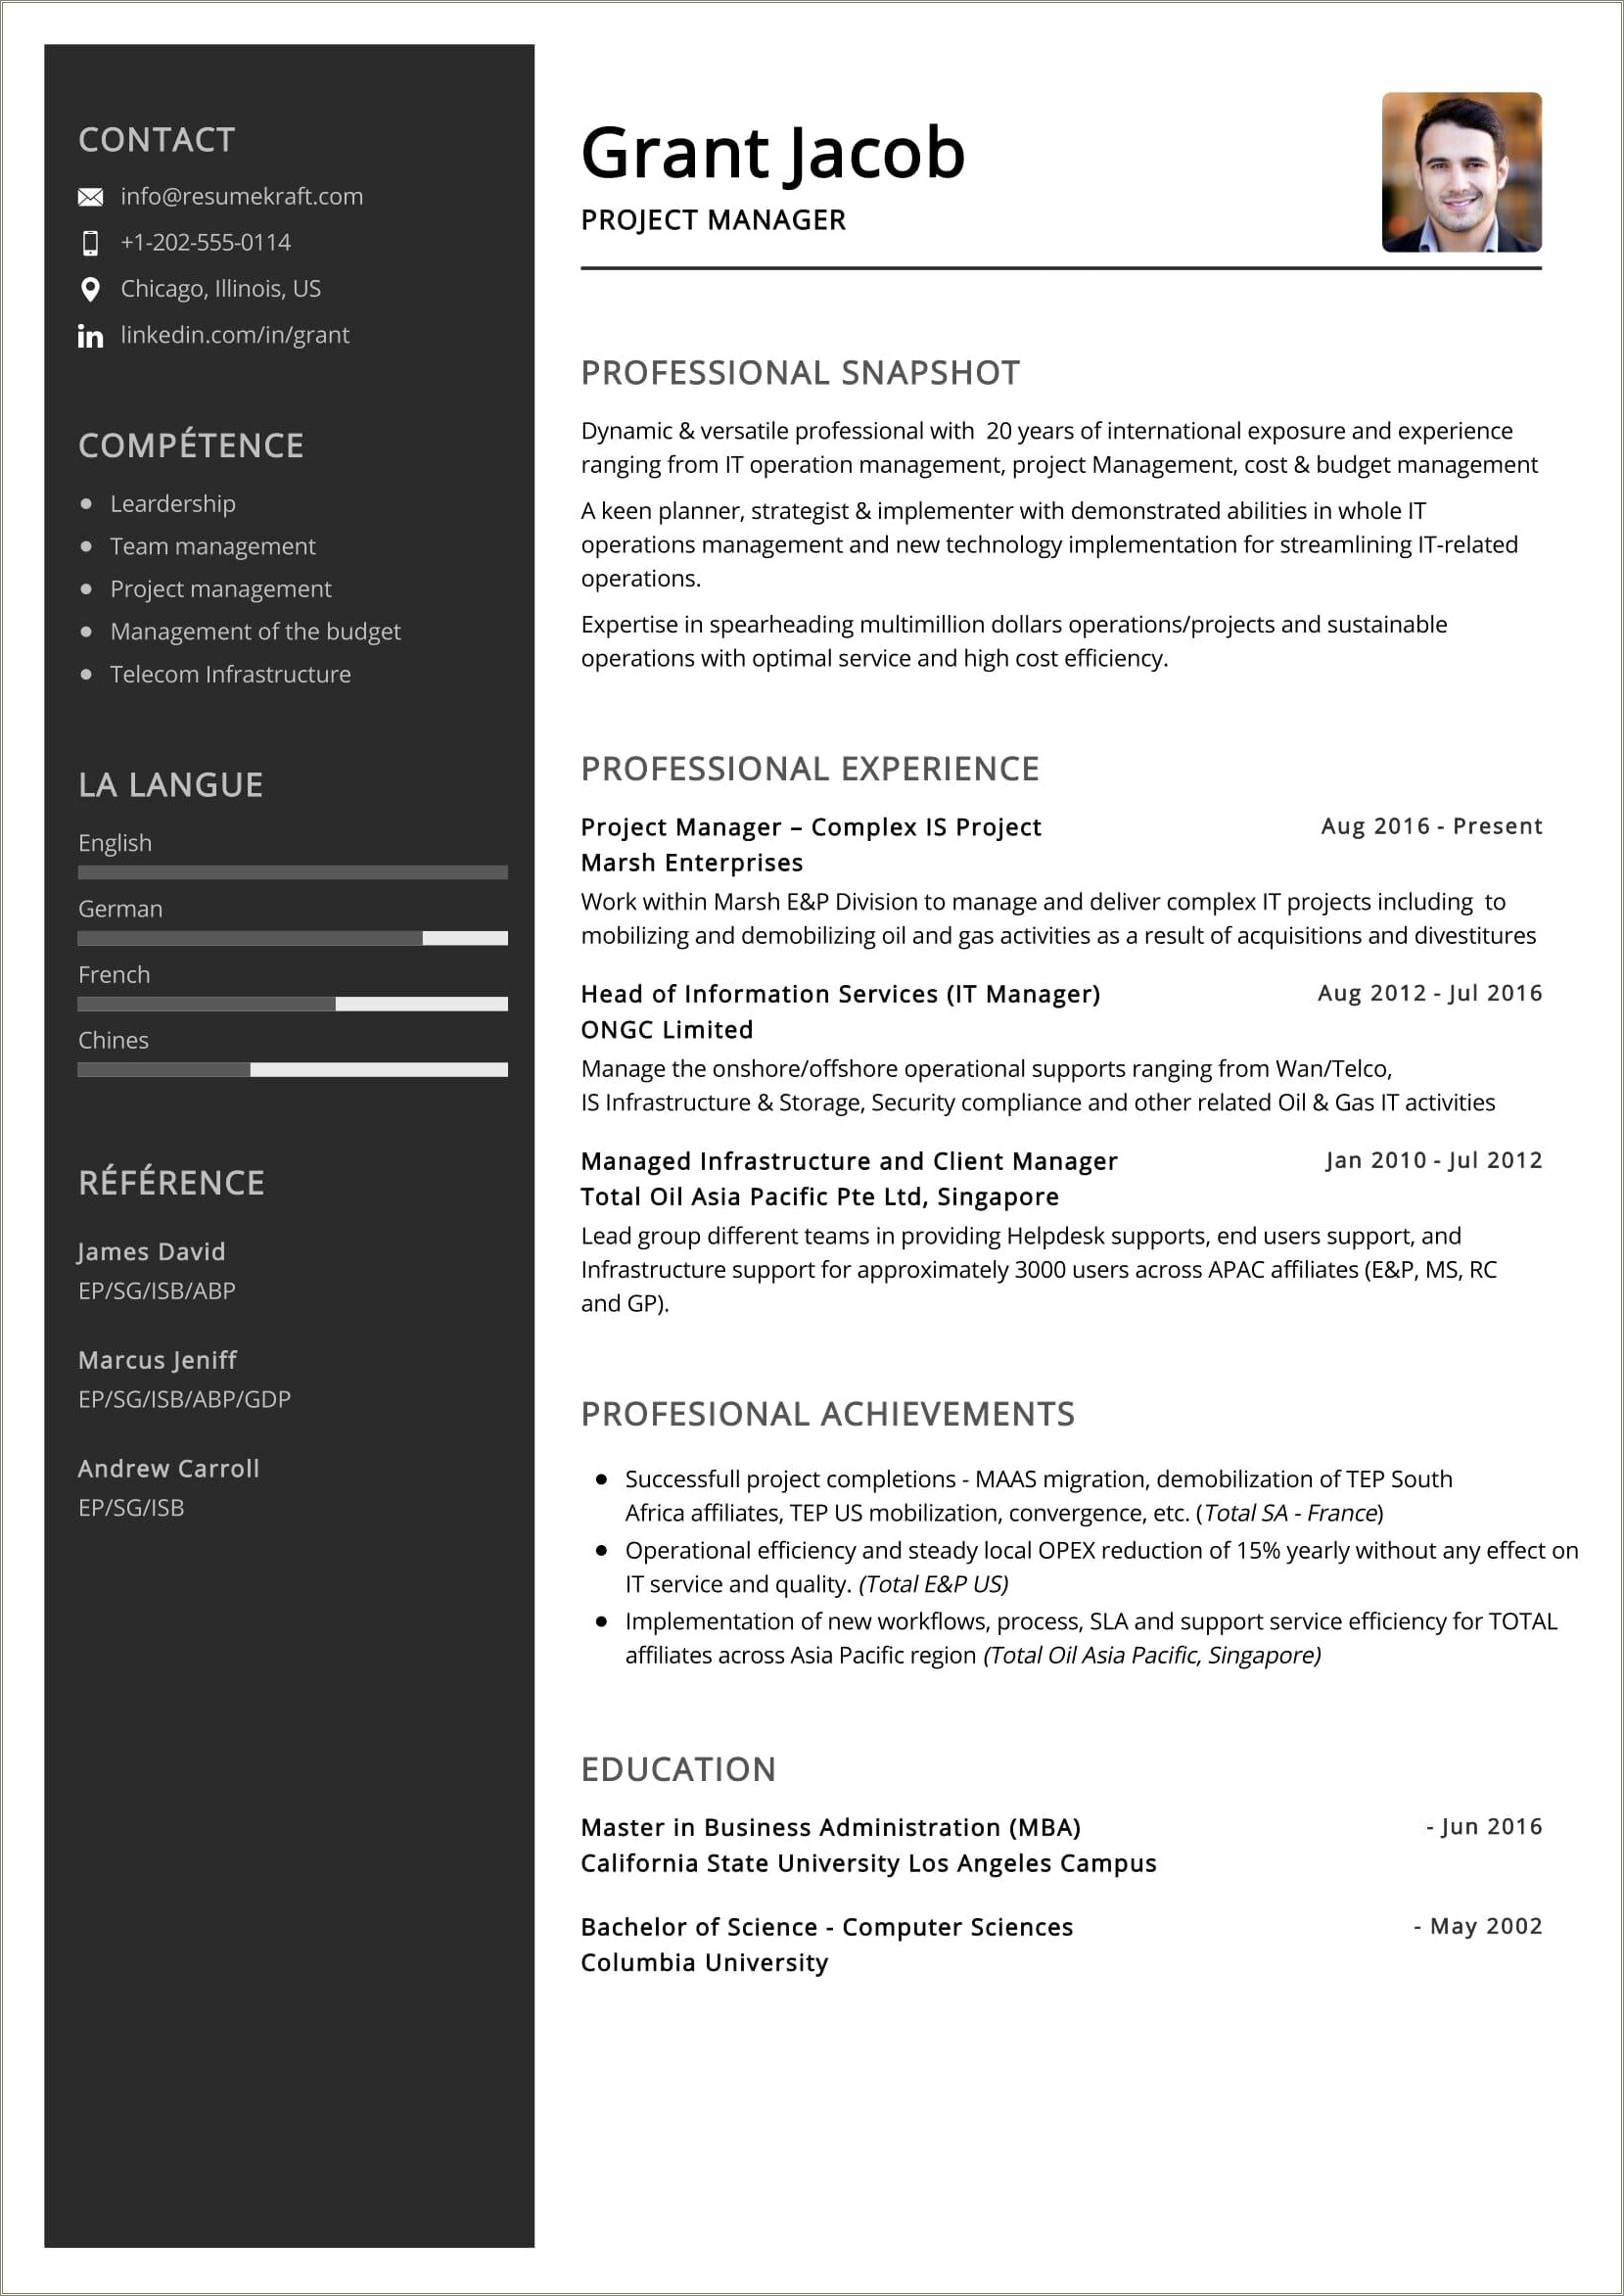 Sample Resume For Project Management Professional